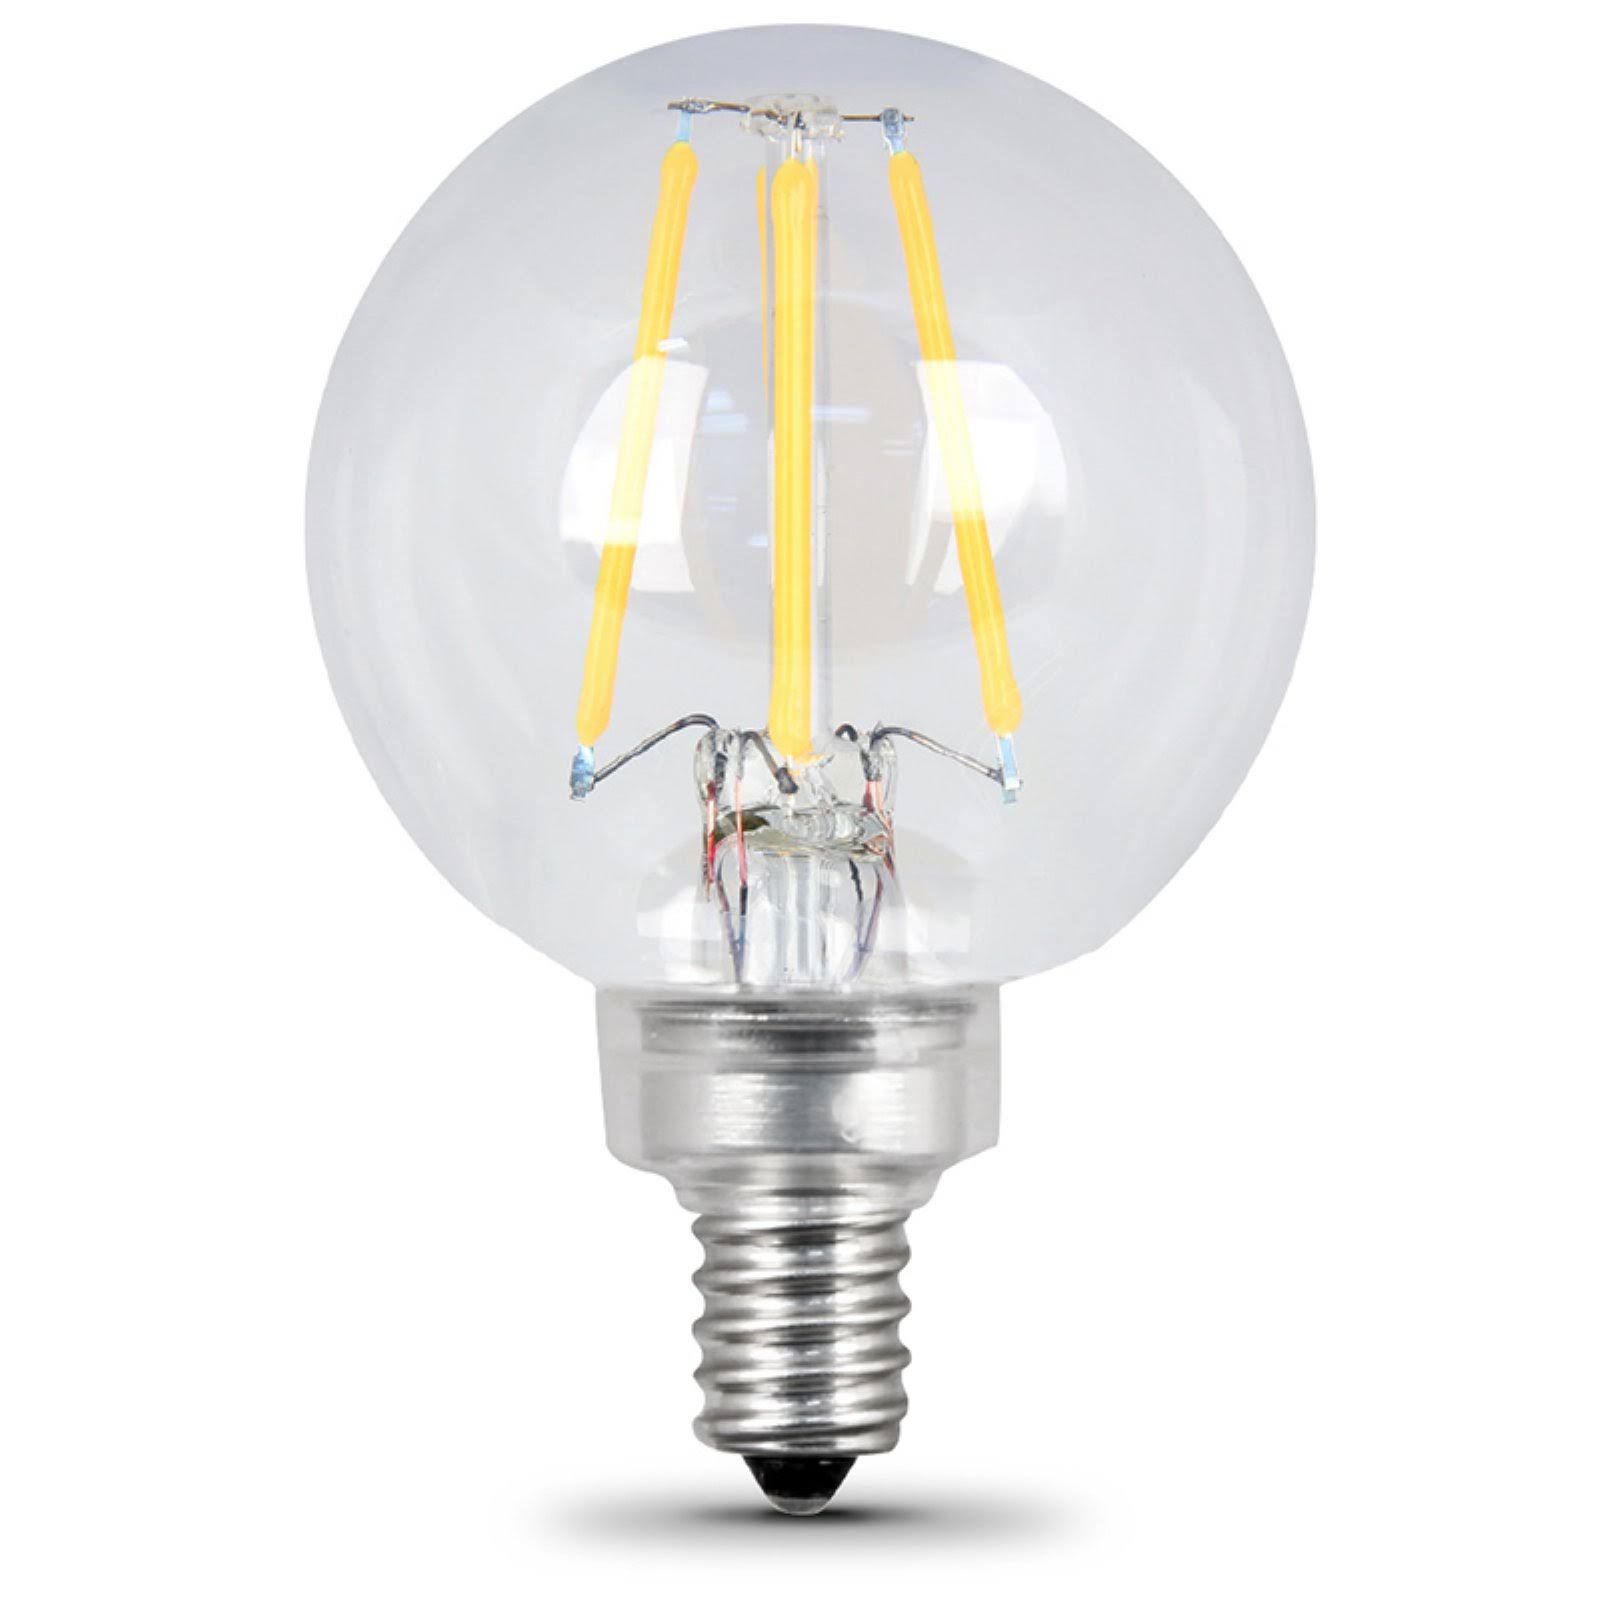 Feit G16 Dimmable Filament LED Decorative Light Bulb - 40W, Medium Base, 2 Pack, Clear